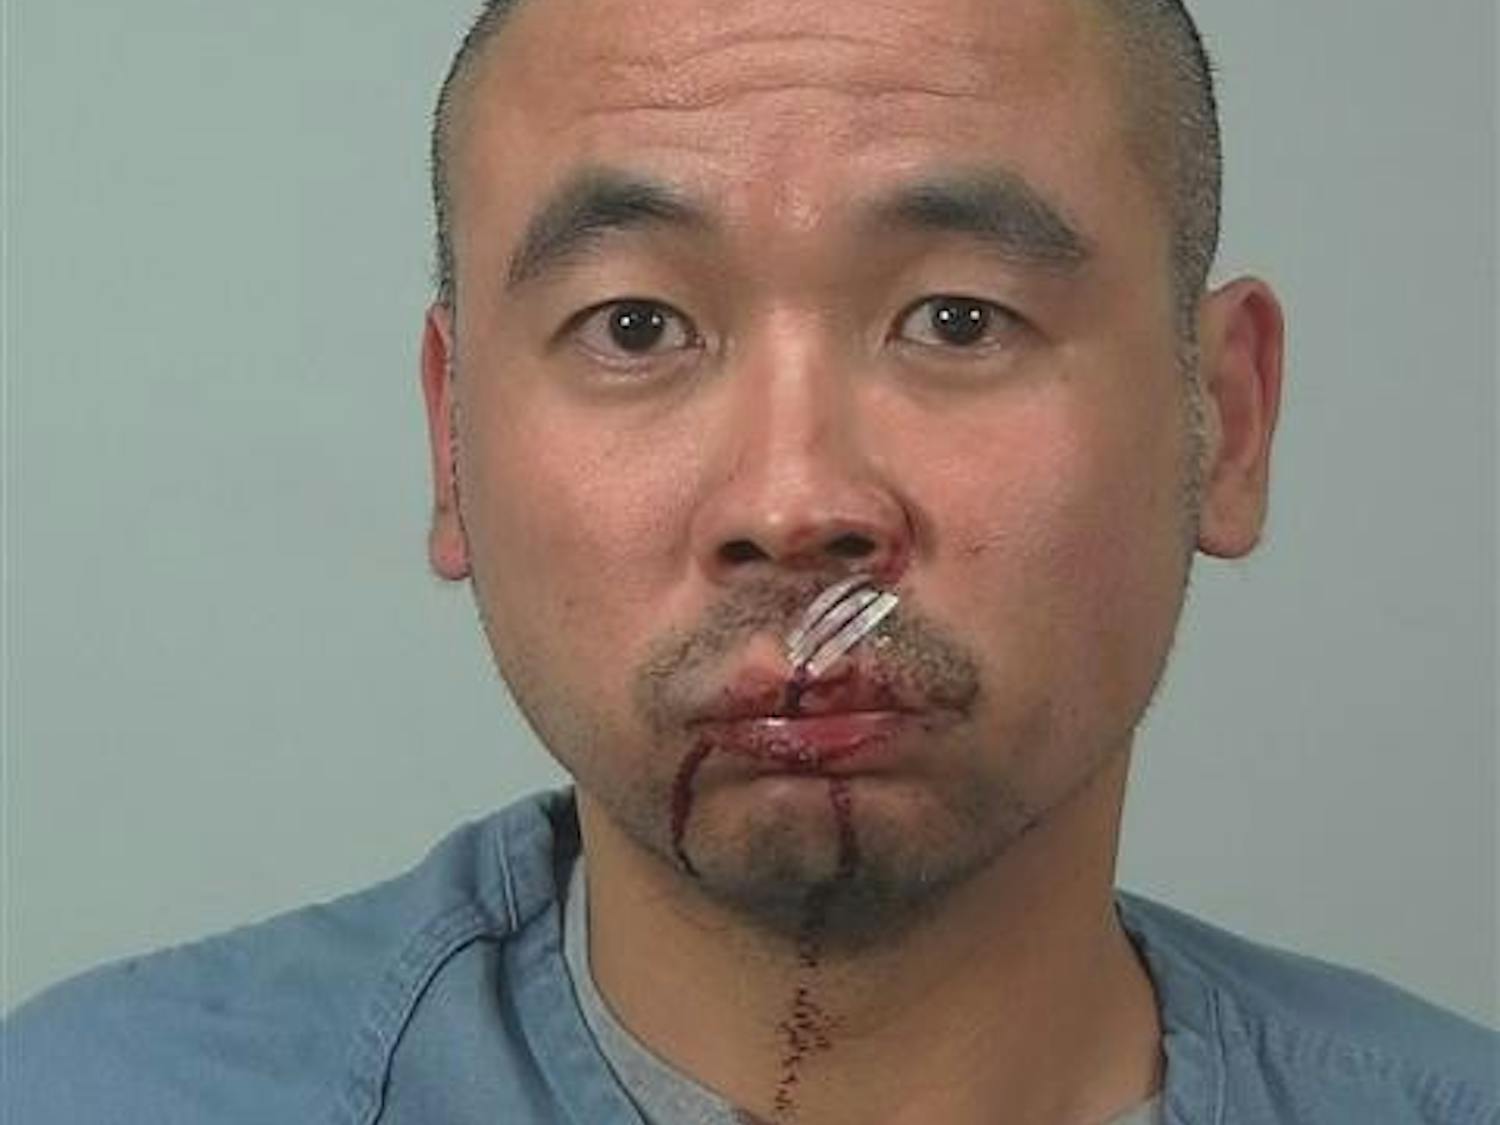 Tino B. Luu, 38, was arrested Thursday after attempting to rob a student on State Street.